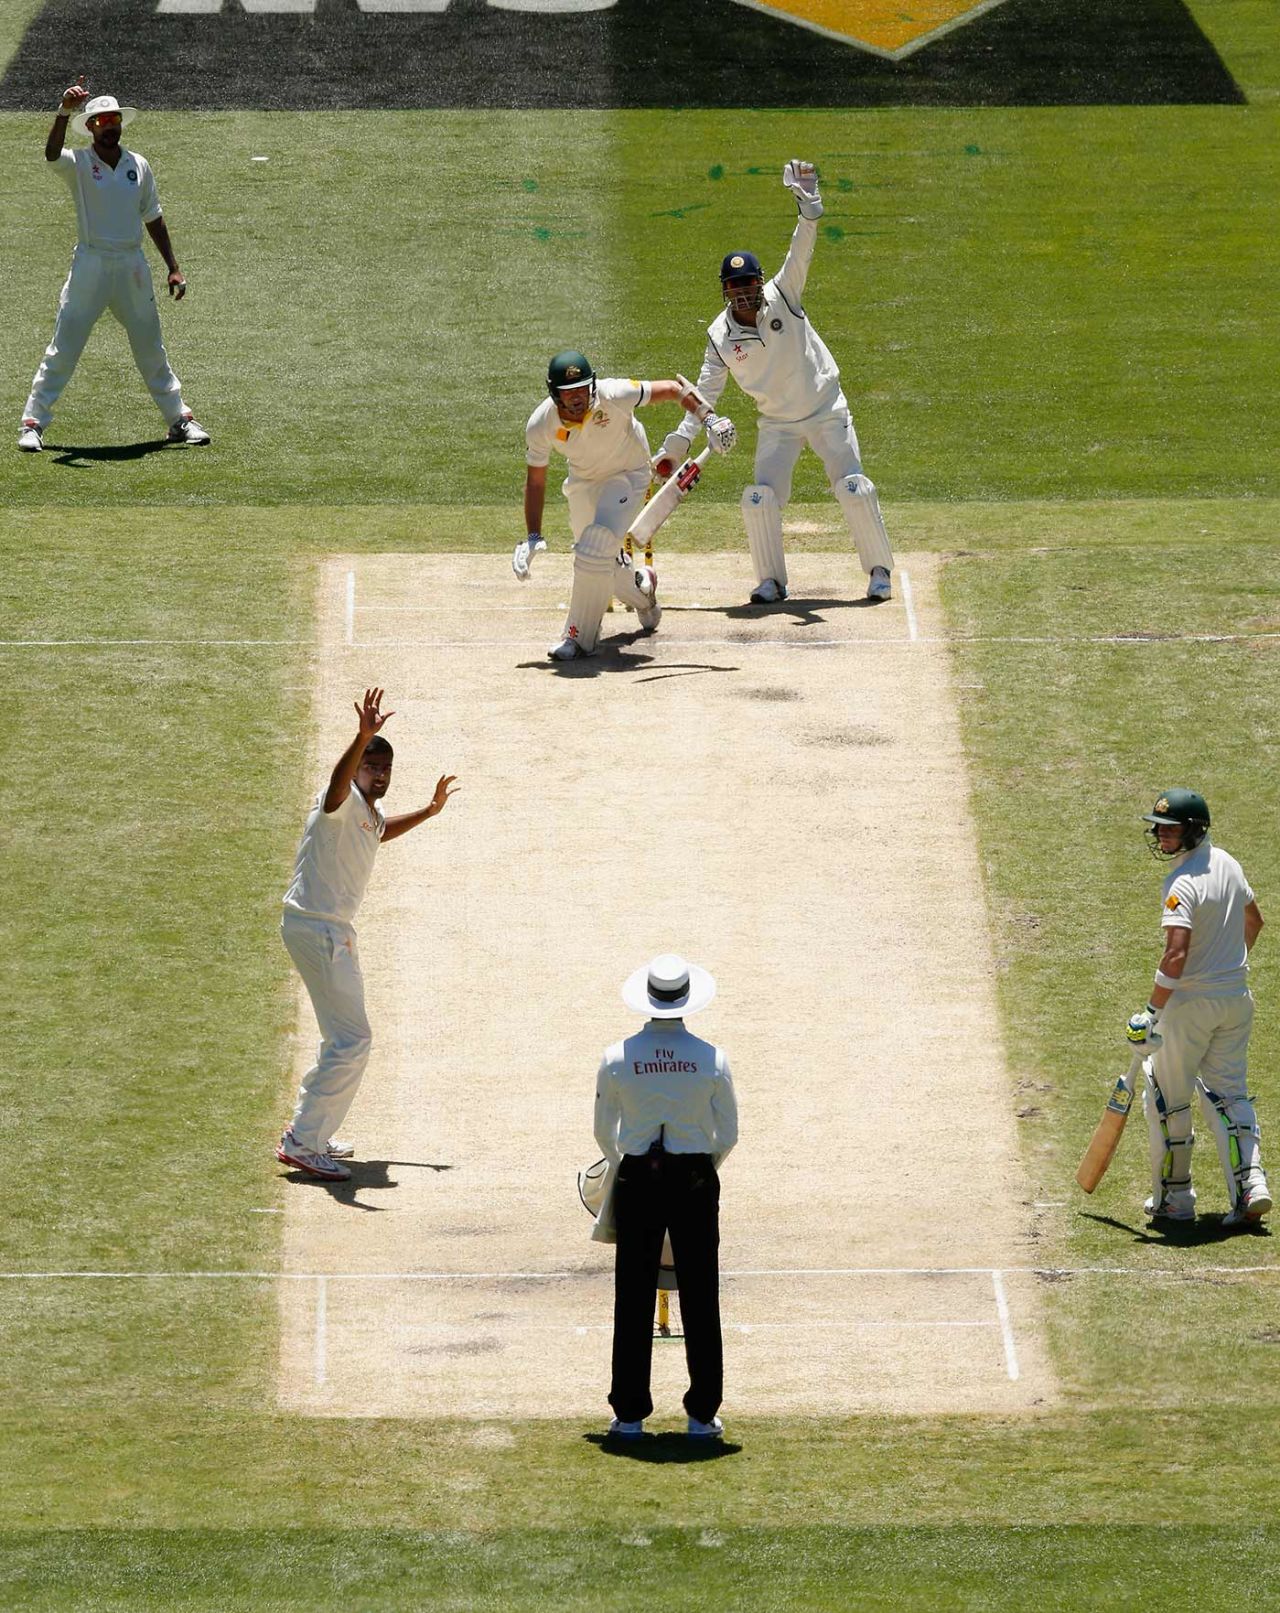 R Ashwin appeals for the wicket of Shane Watson, Australia v India, 3rd Test, Melbourne, day two, December 27, 2014